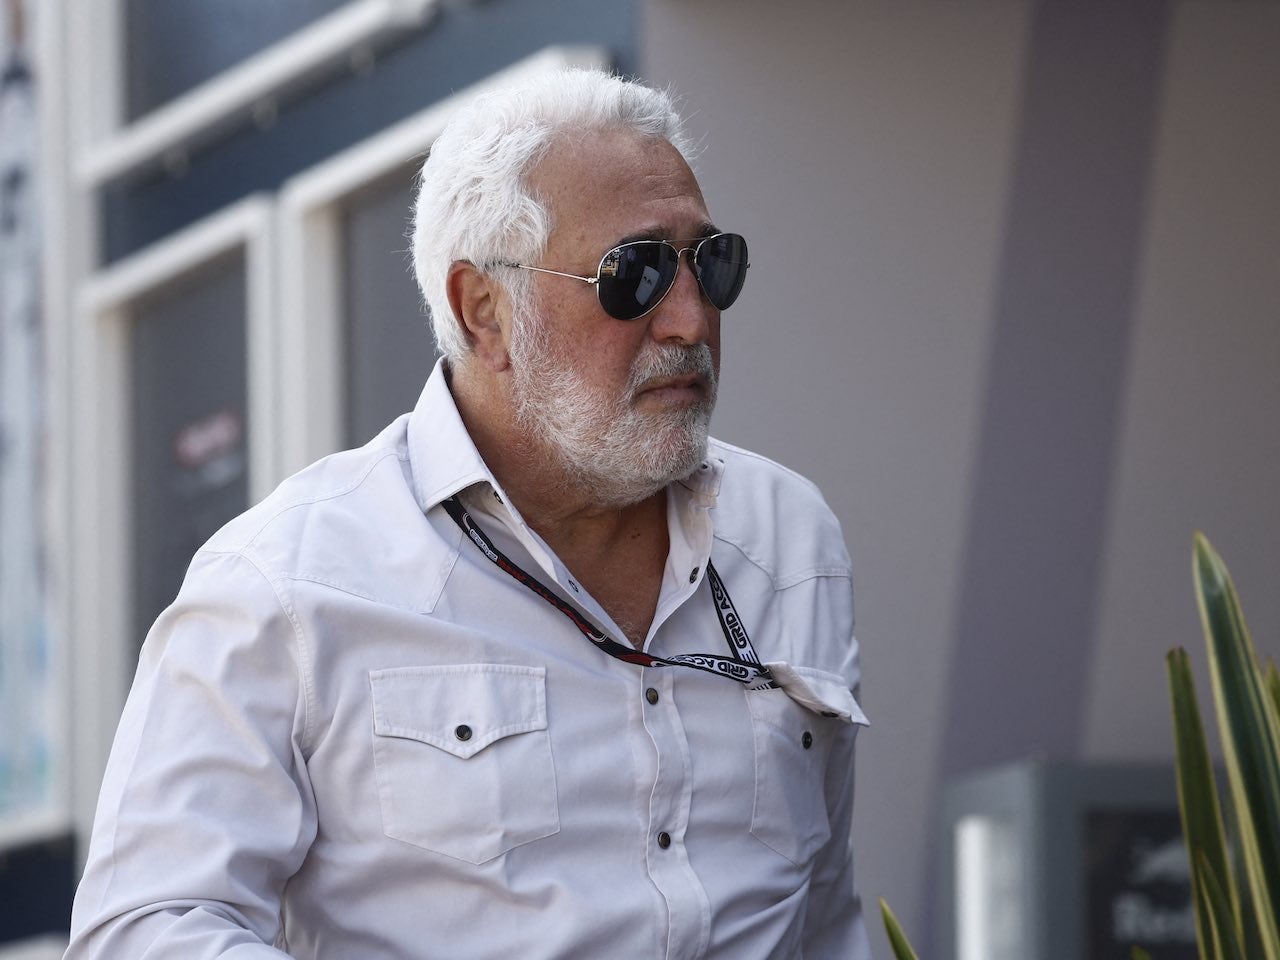 Stroll boasts about 'stagging' F1 investments